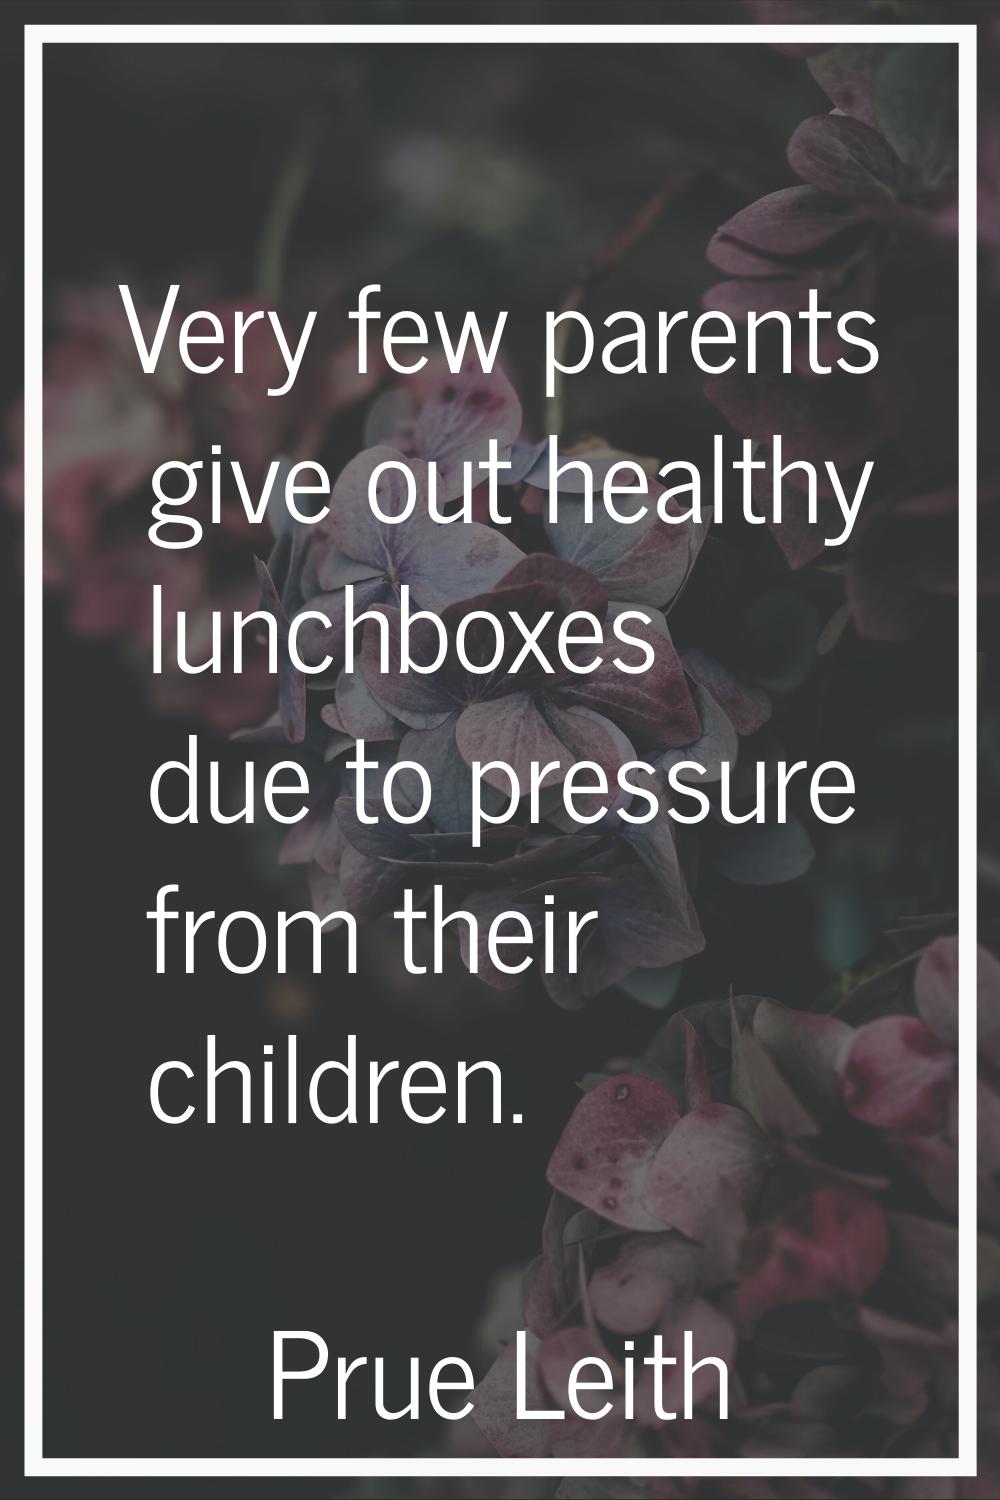 Very few parents give out healthy lunchboxes due to pressure from their children.